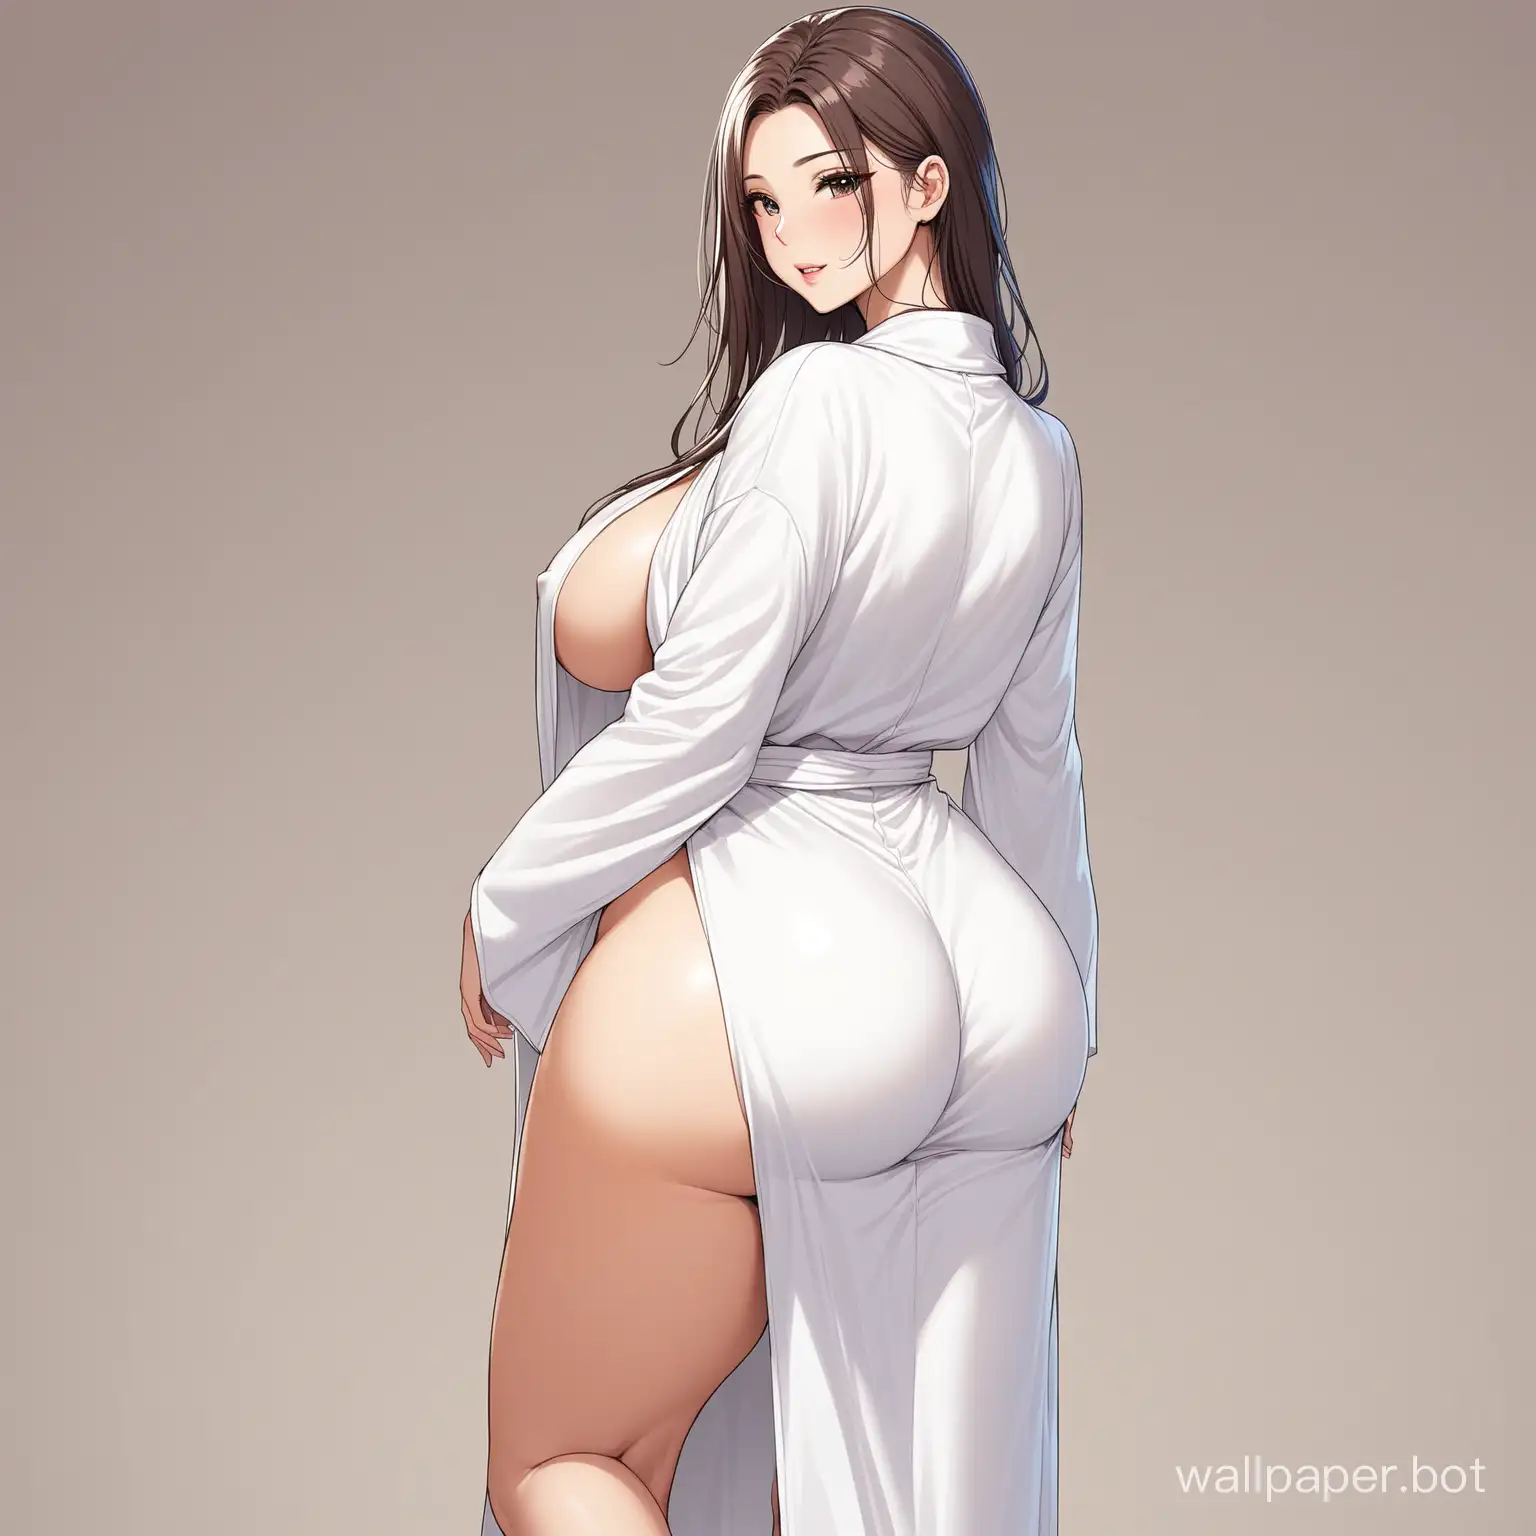 Girl, in a white robe, big breasts, big butt